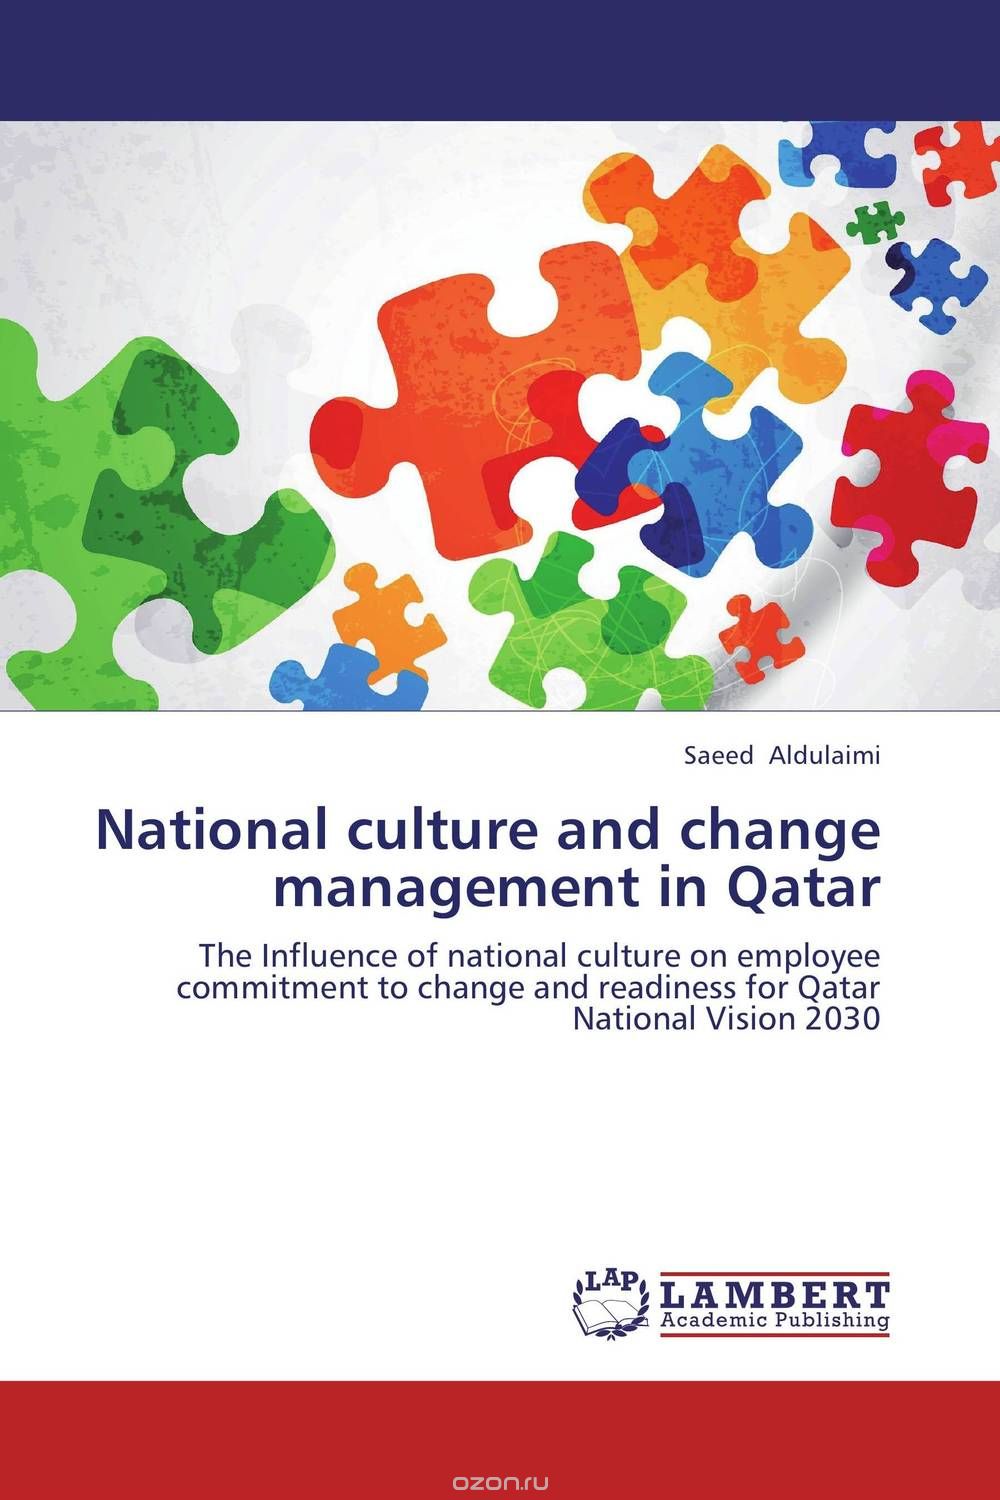 National culture and change management in Qatar